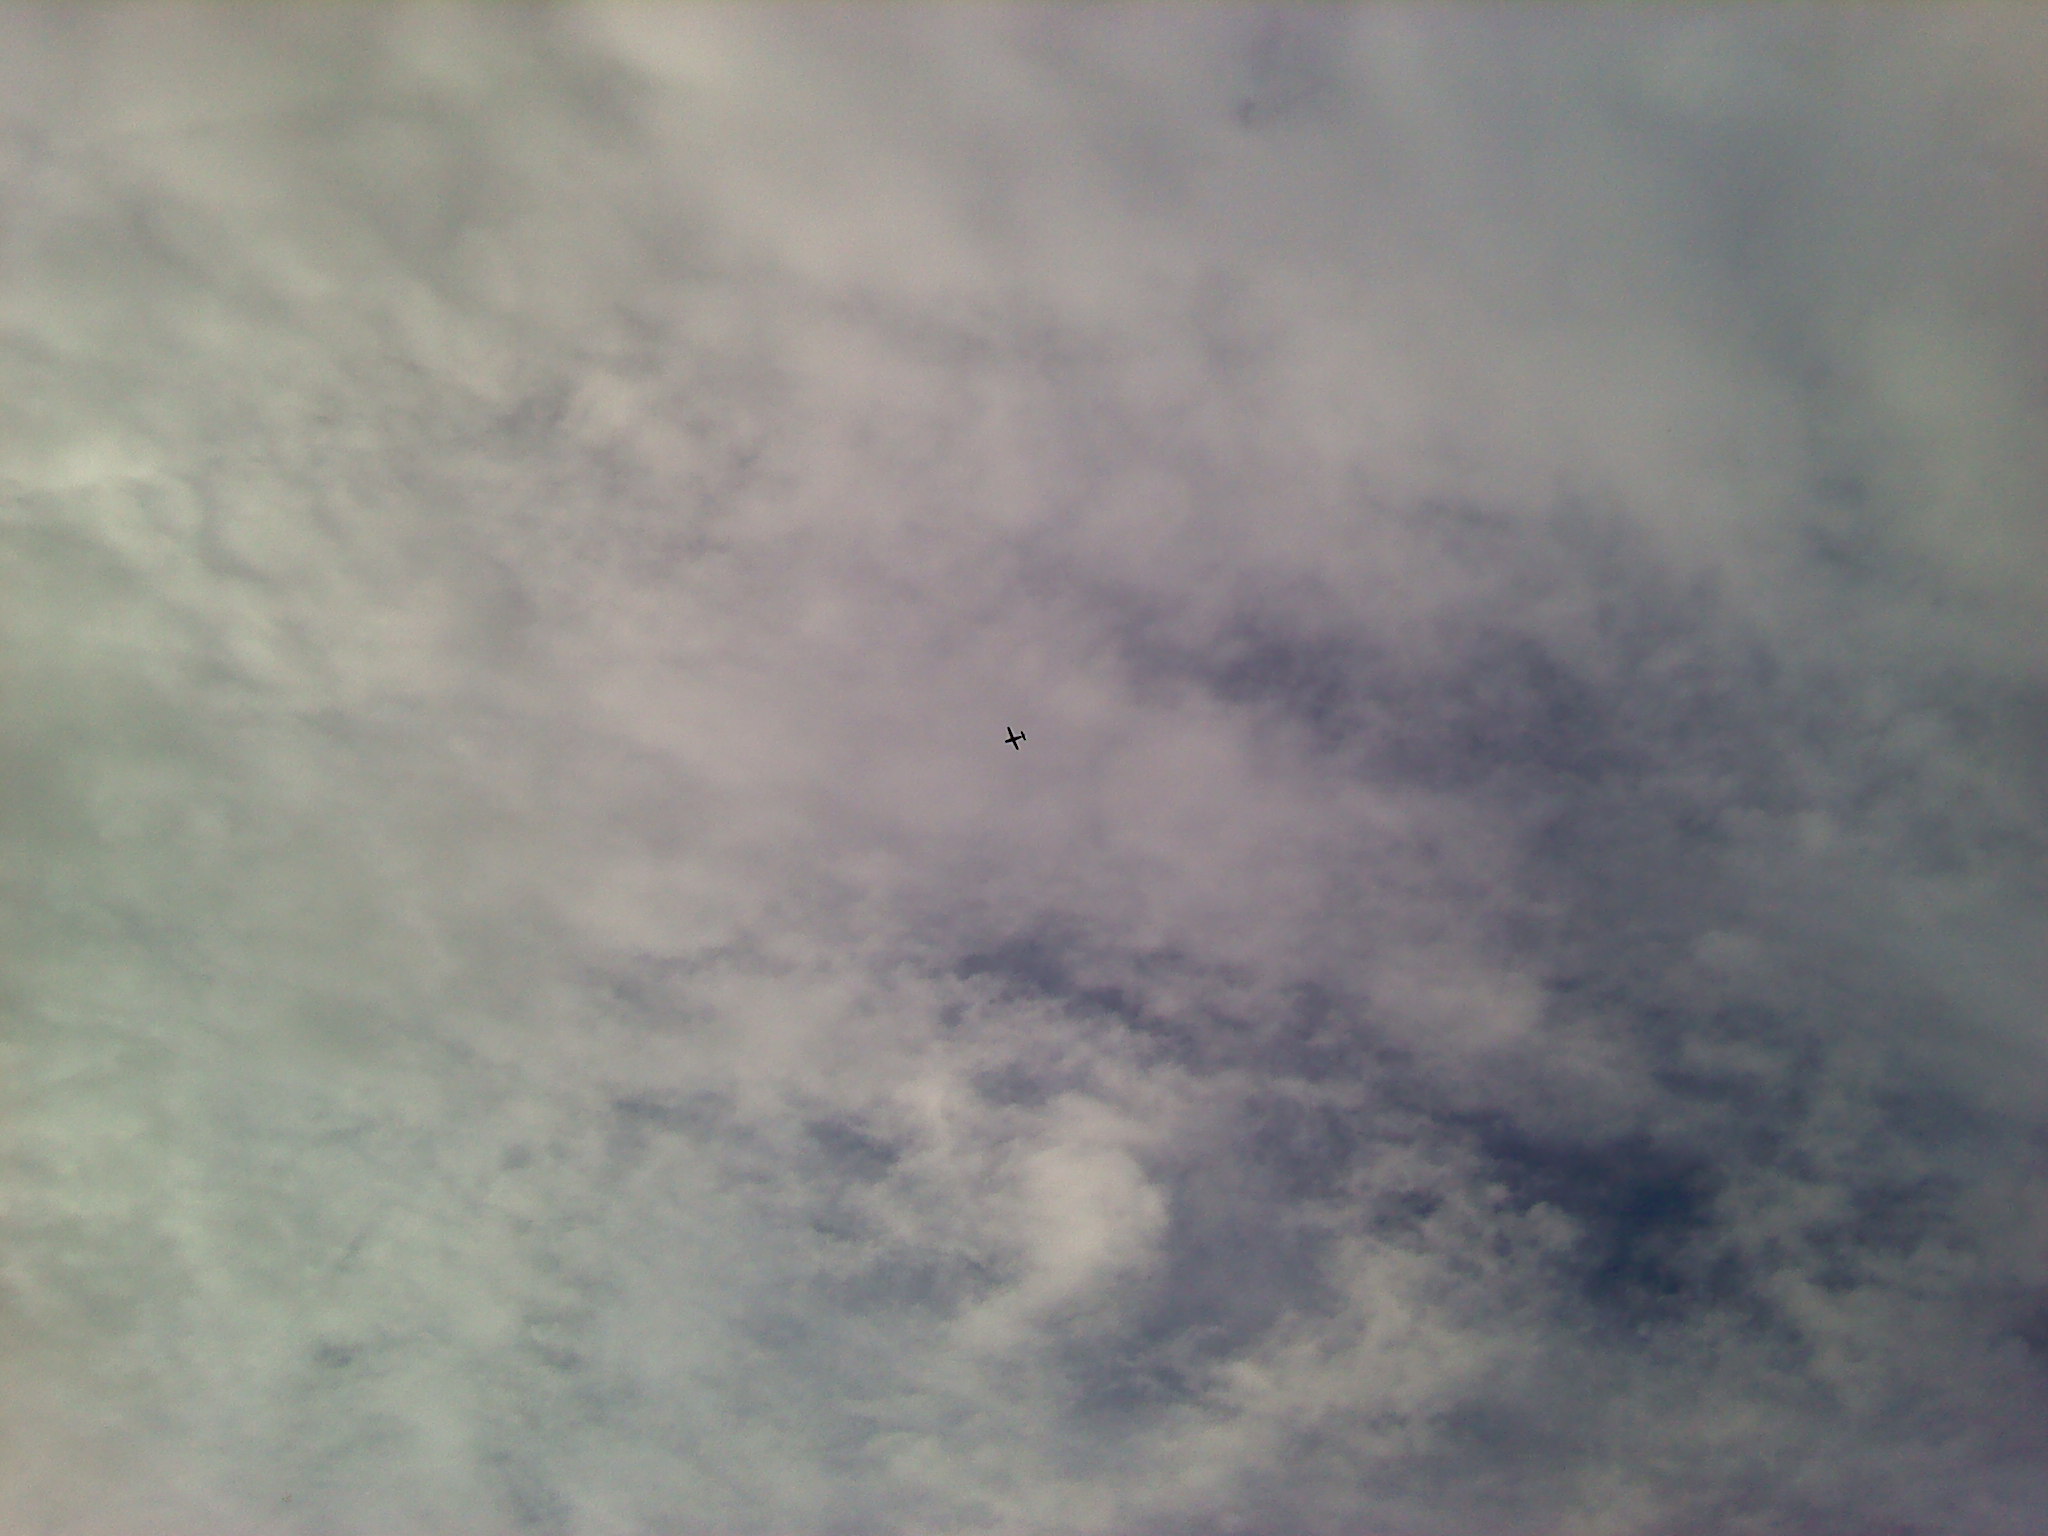 The Clouds are Up Higher in the sky and the Air Plane is Flying Below the Clouds here in Sydney Nova Scotia.